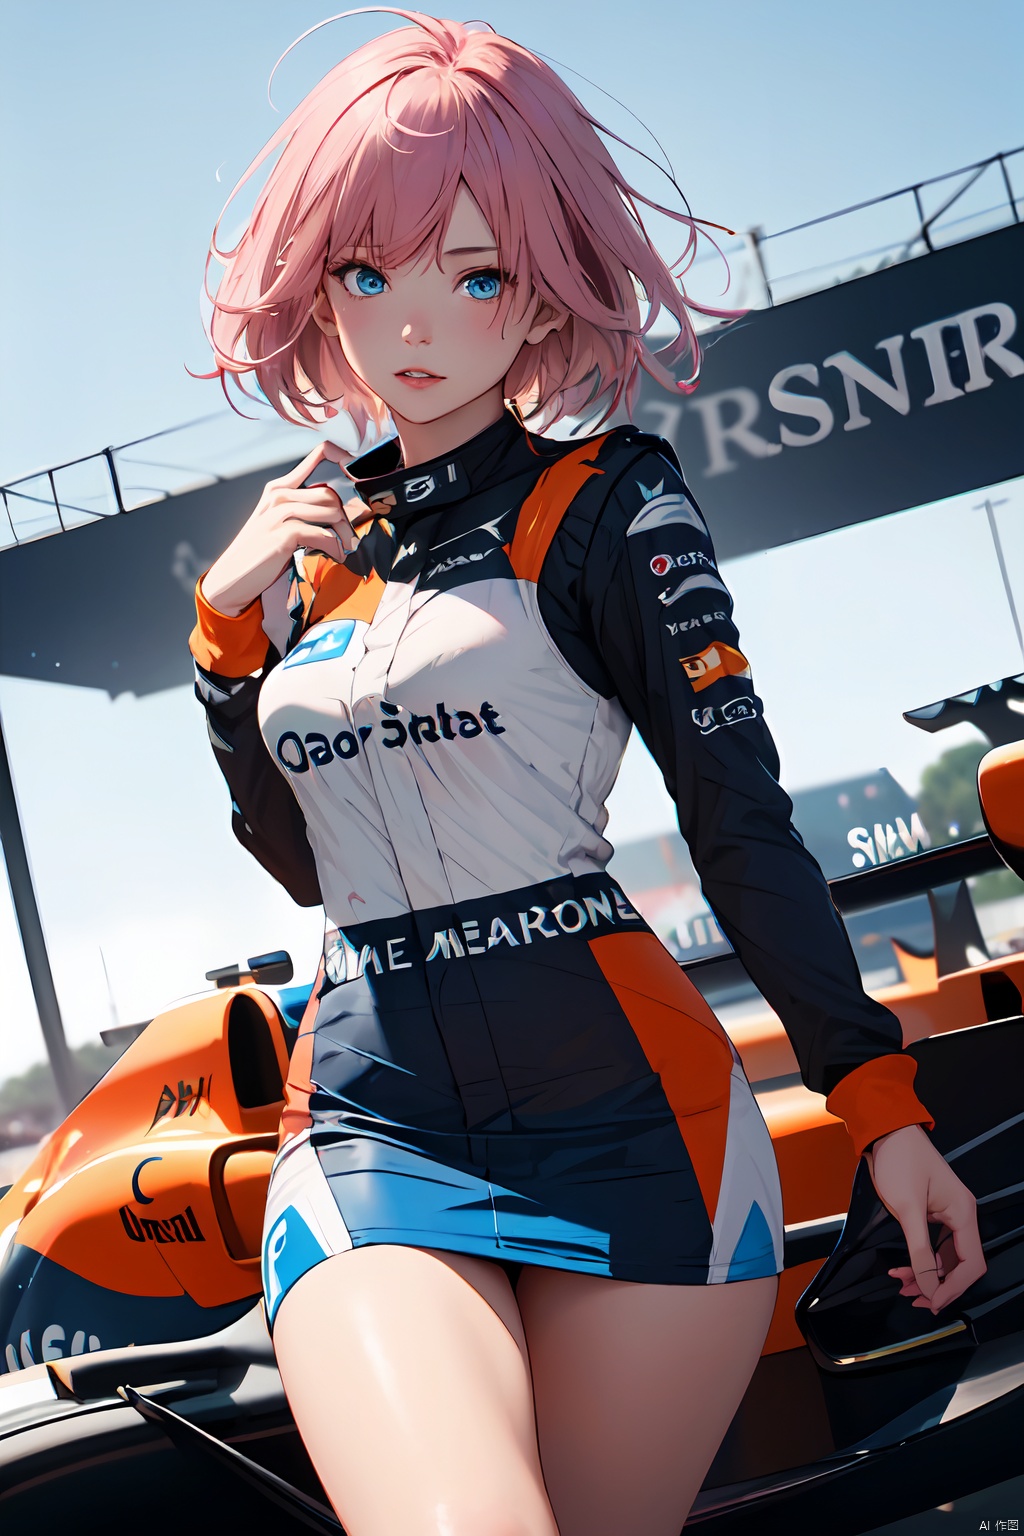  masterpiece,masterpiece, best quality,
bronyarand,1 girl, solo. pink hair,
Looking at viewer, full short, lips, blue eyes, standing, split legs, F1 car racing outfit, car racing model, F1, short skirt, perfect slim body,（white and orange:1.2), heels. low angle view